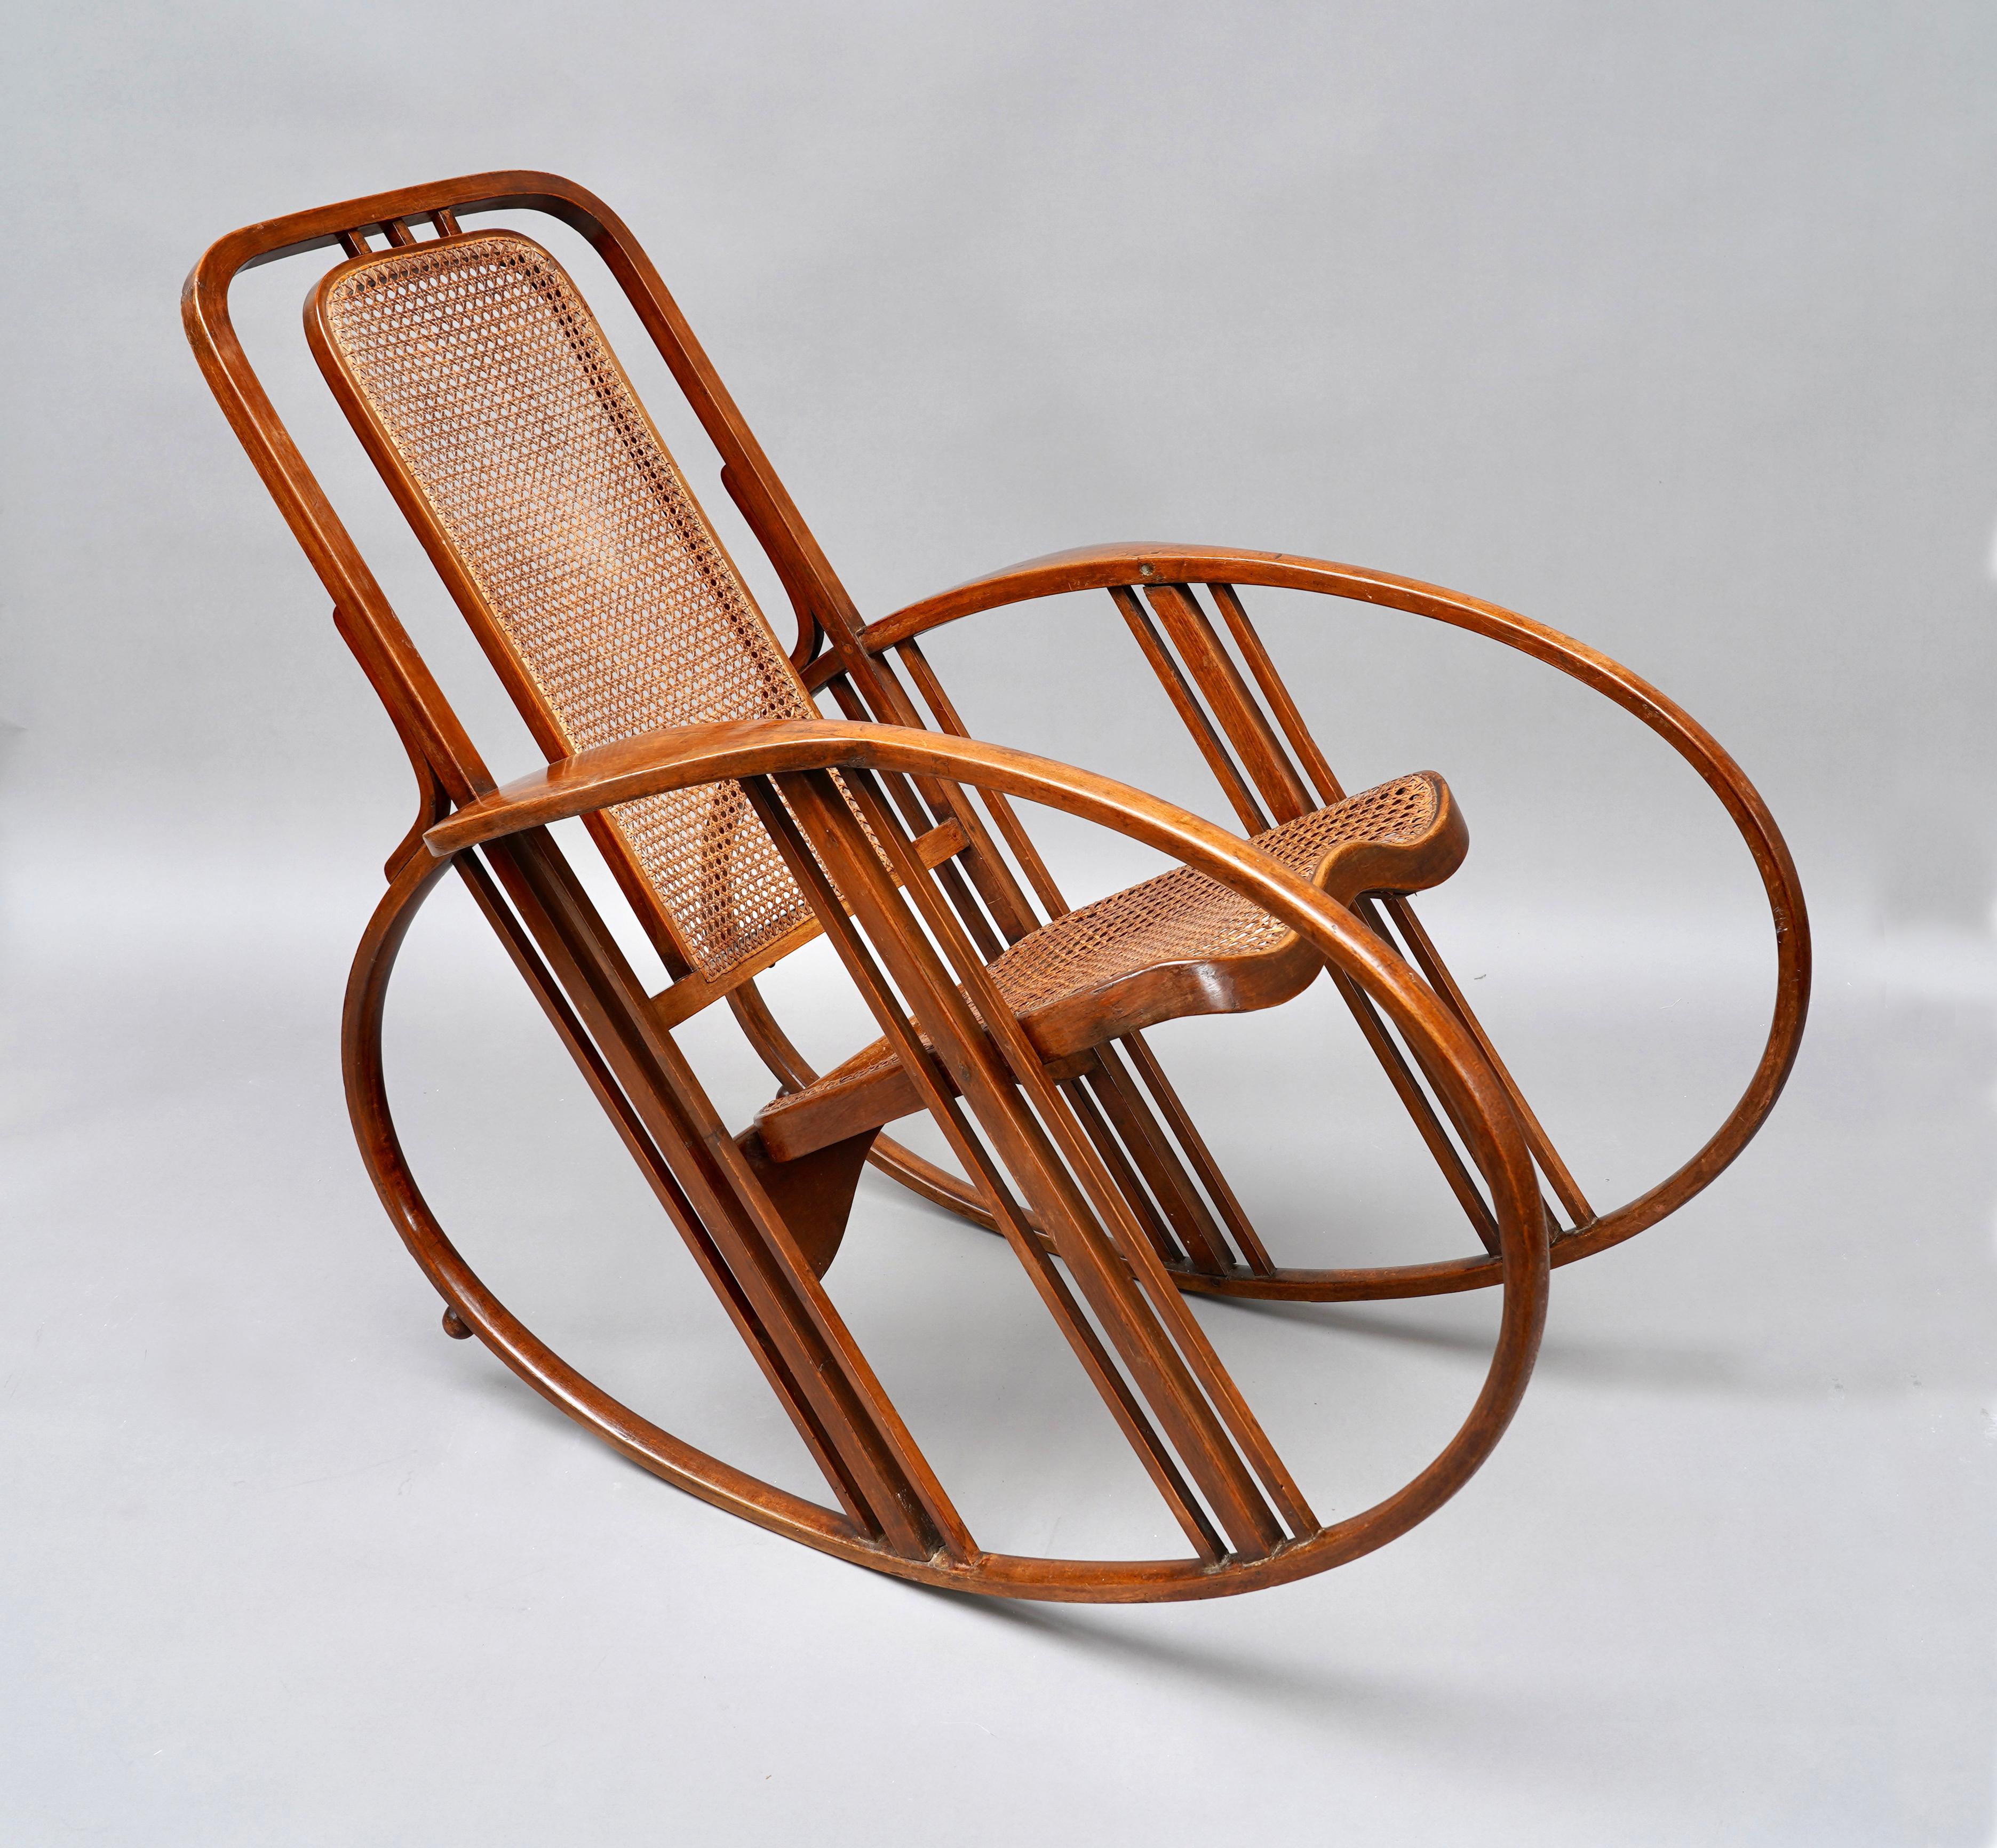 Rare “Egg” rocking chair in curved and stained wood, with caned seat and back. The wide oval-shaped armrests, giving their name to the model, and allowing gentle swinging, are stabilized by small balls at the back. Here we find aerodynamic